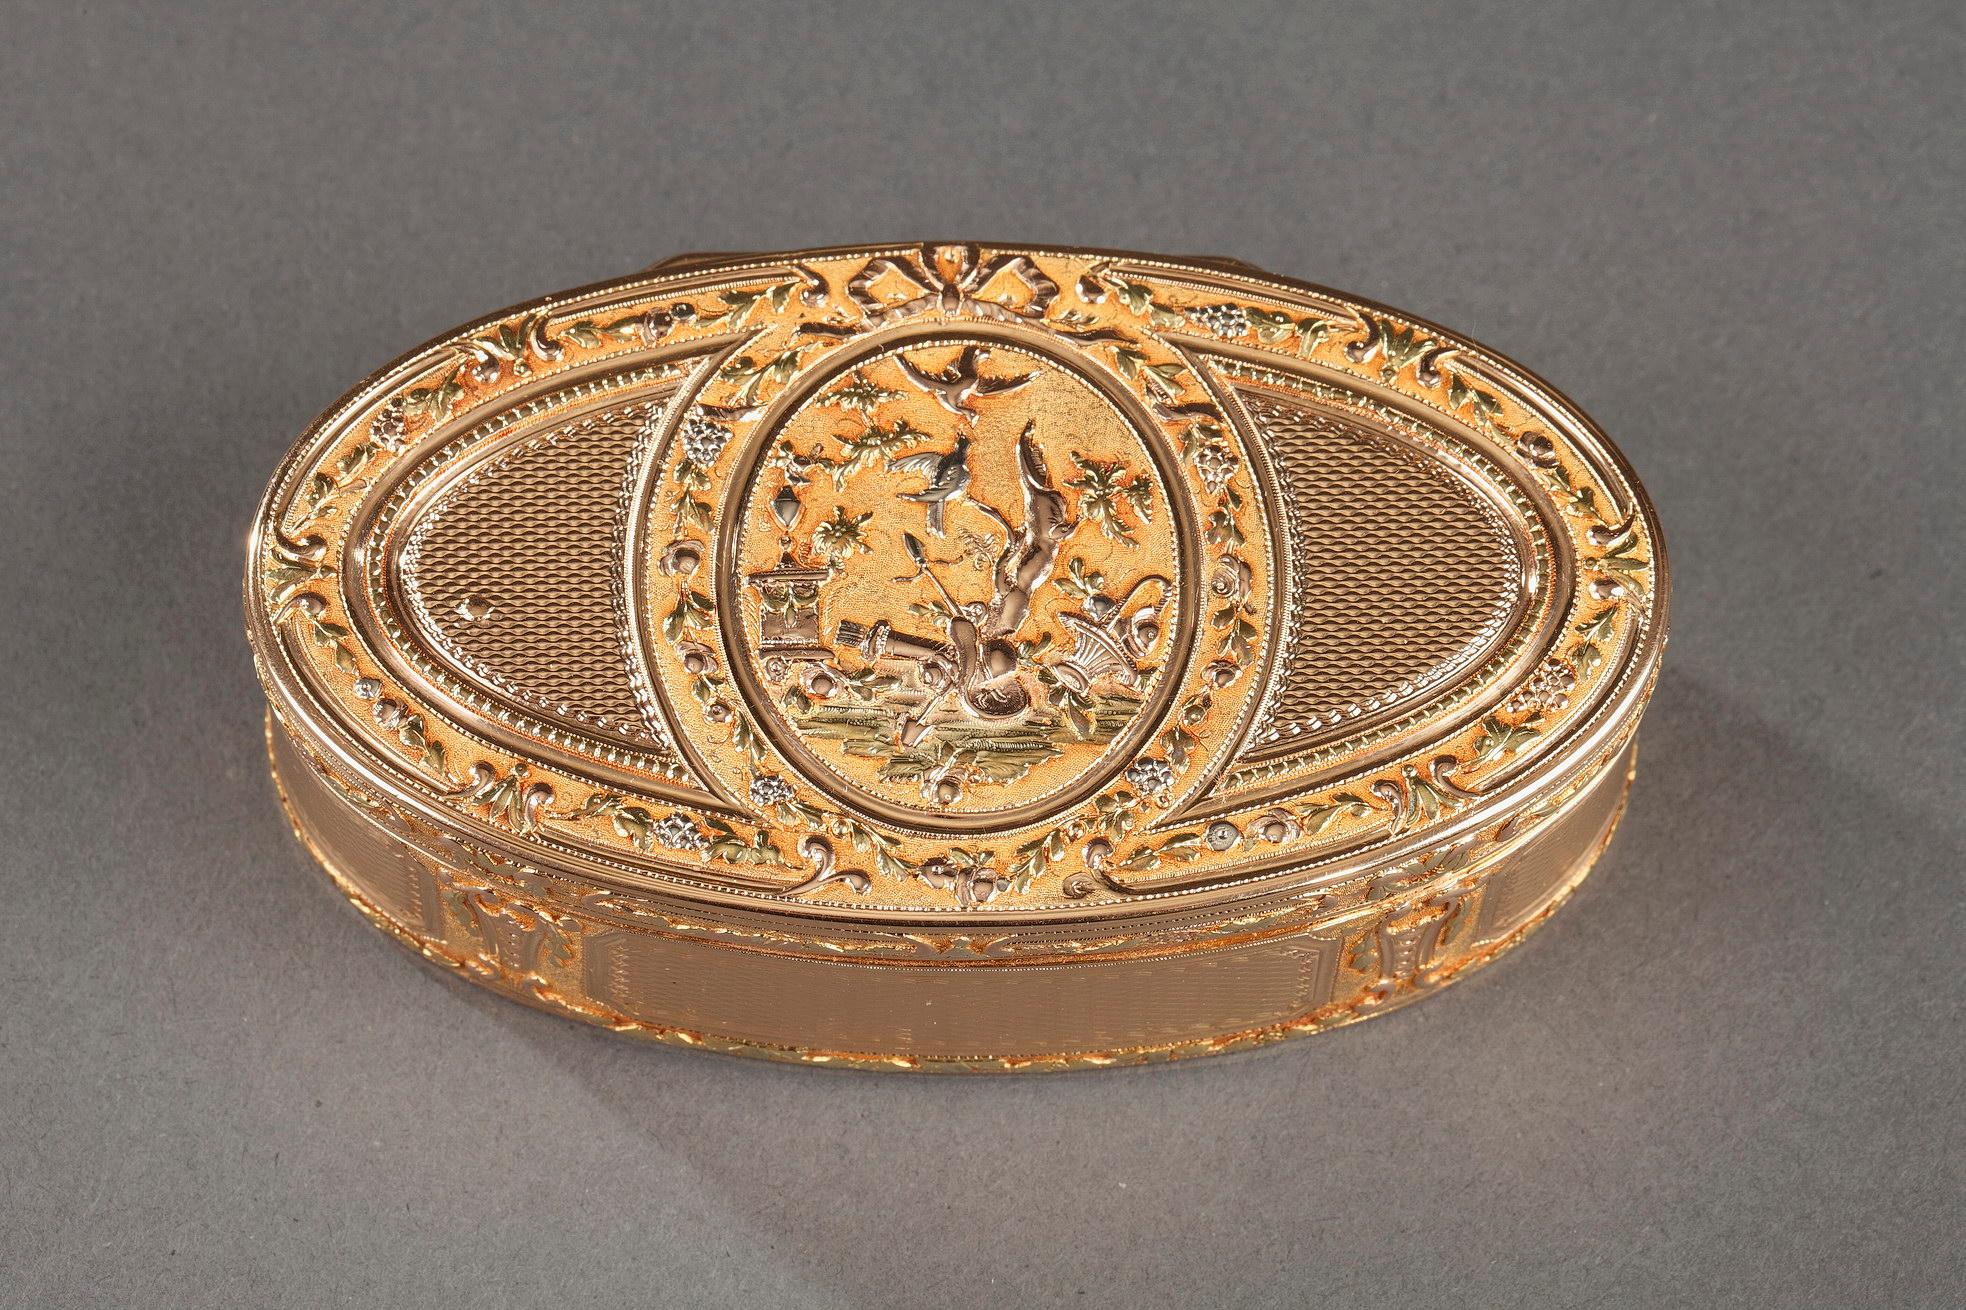 Oval snuff box featuring in gold of several tones.. The hinged lid is decorated with a central medallion featuring two doves near an altar on a landscape background. The doves that stand out against a background of amati gold. The doves, a symbol of